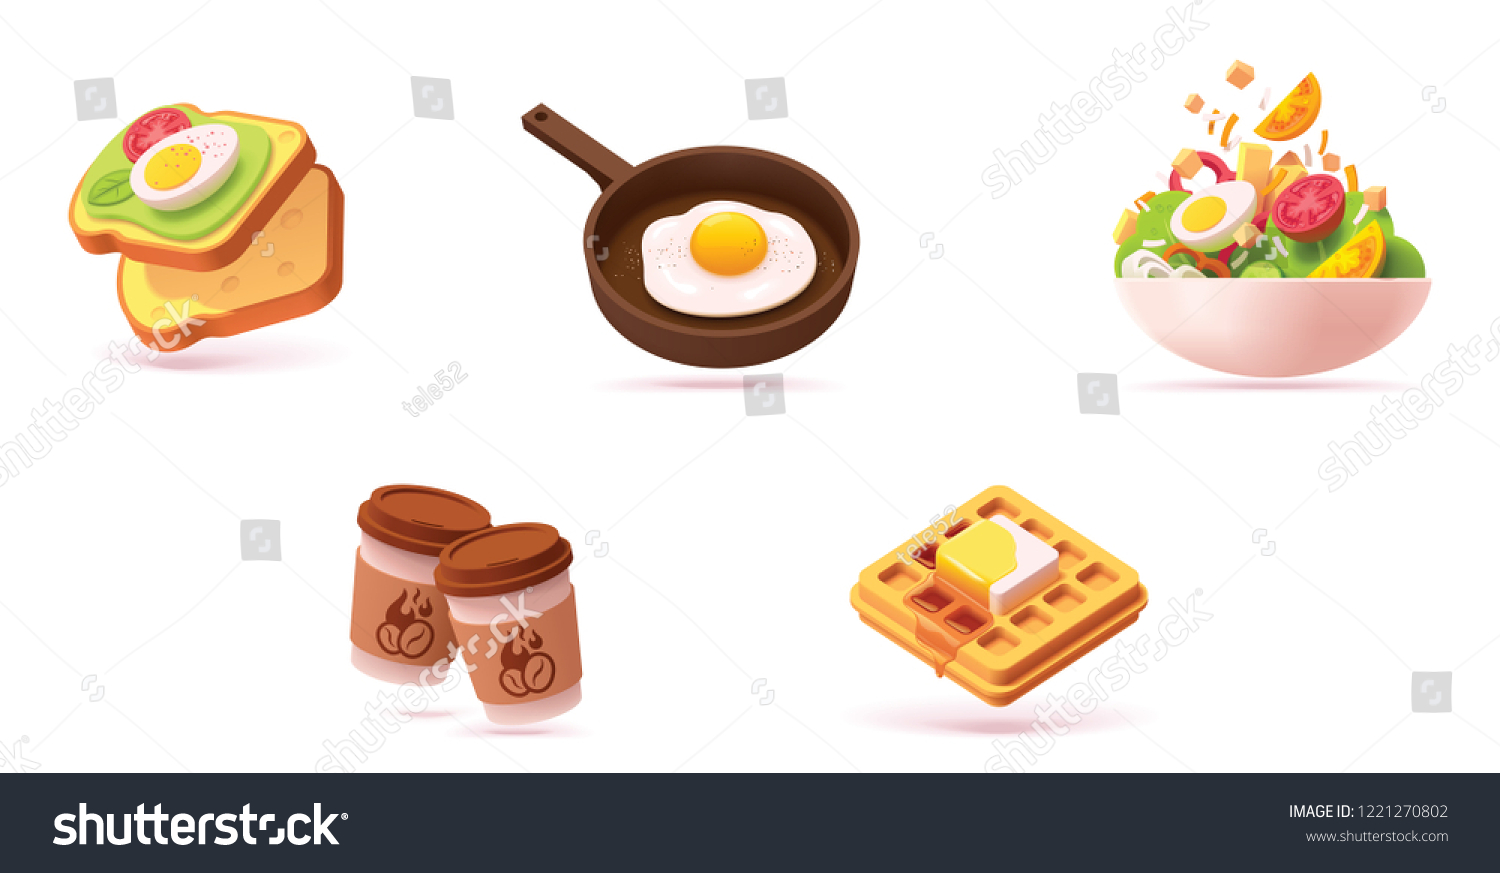 SVG of Vector breakfast icon set. Includes illustrations avocado toasts with egg, fried egg, salad, waffle with maple syrup and coffee svg